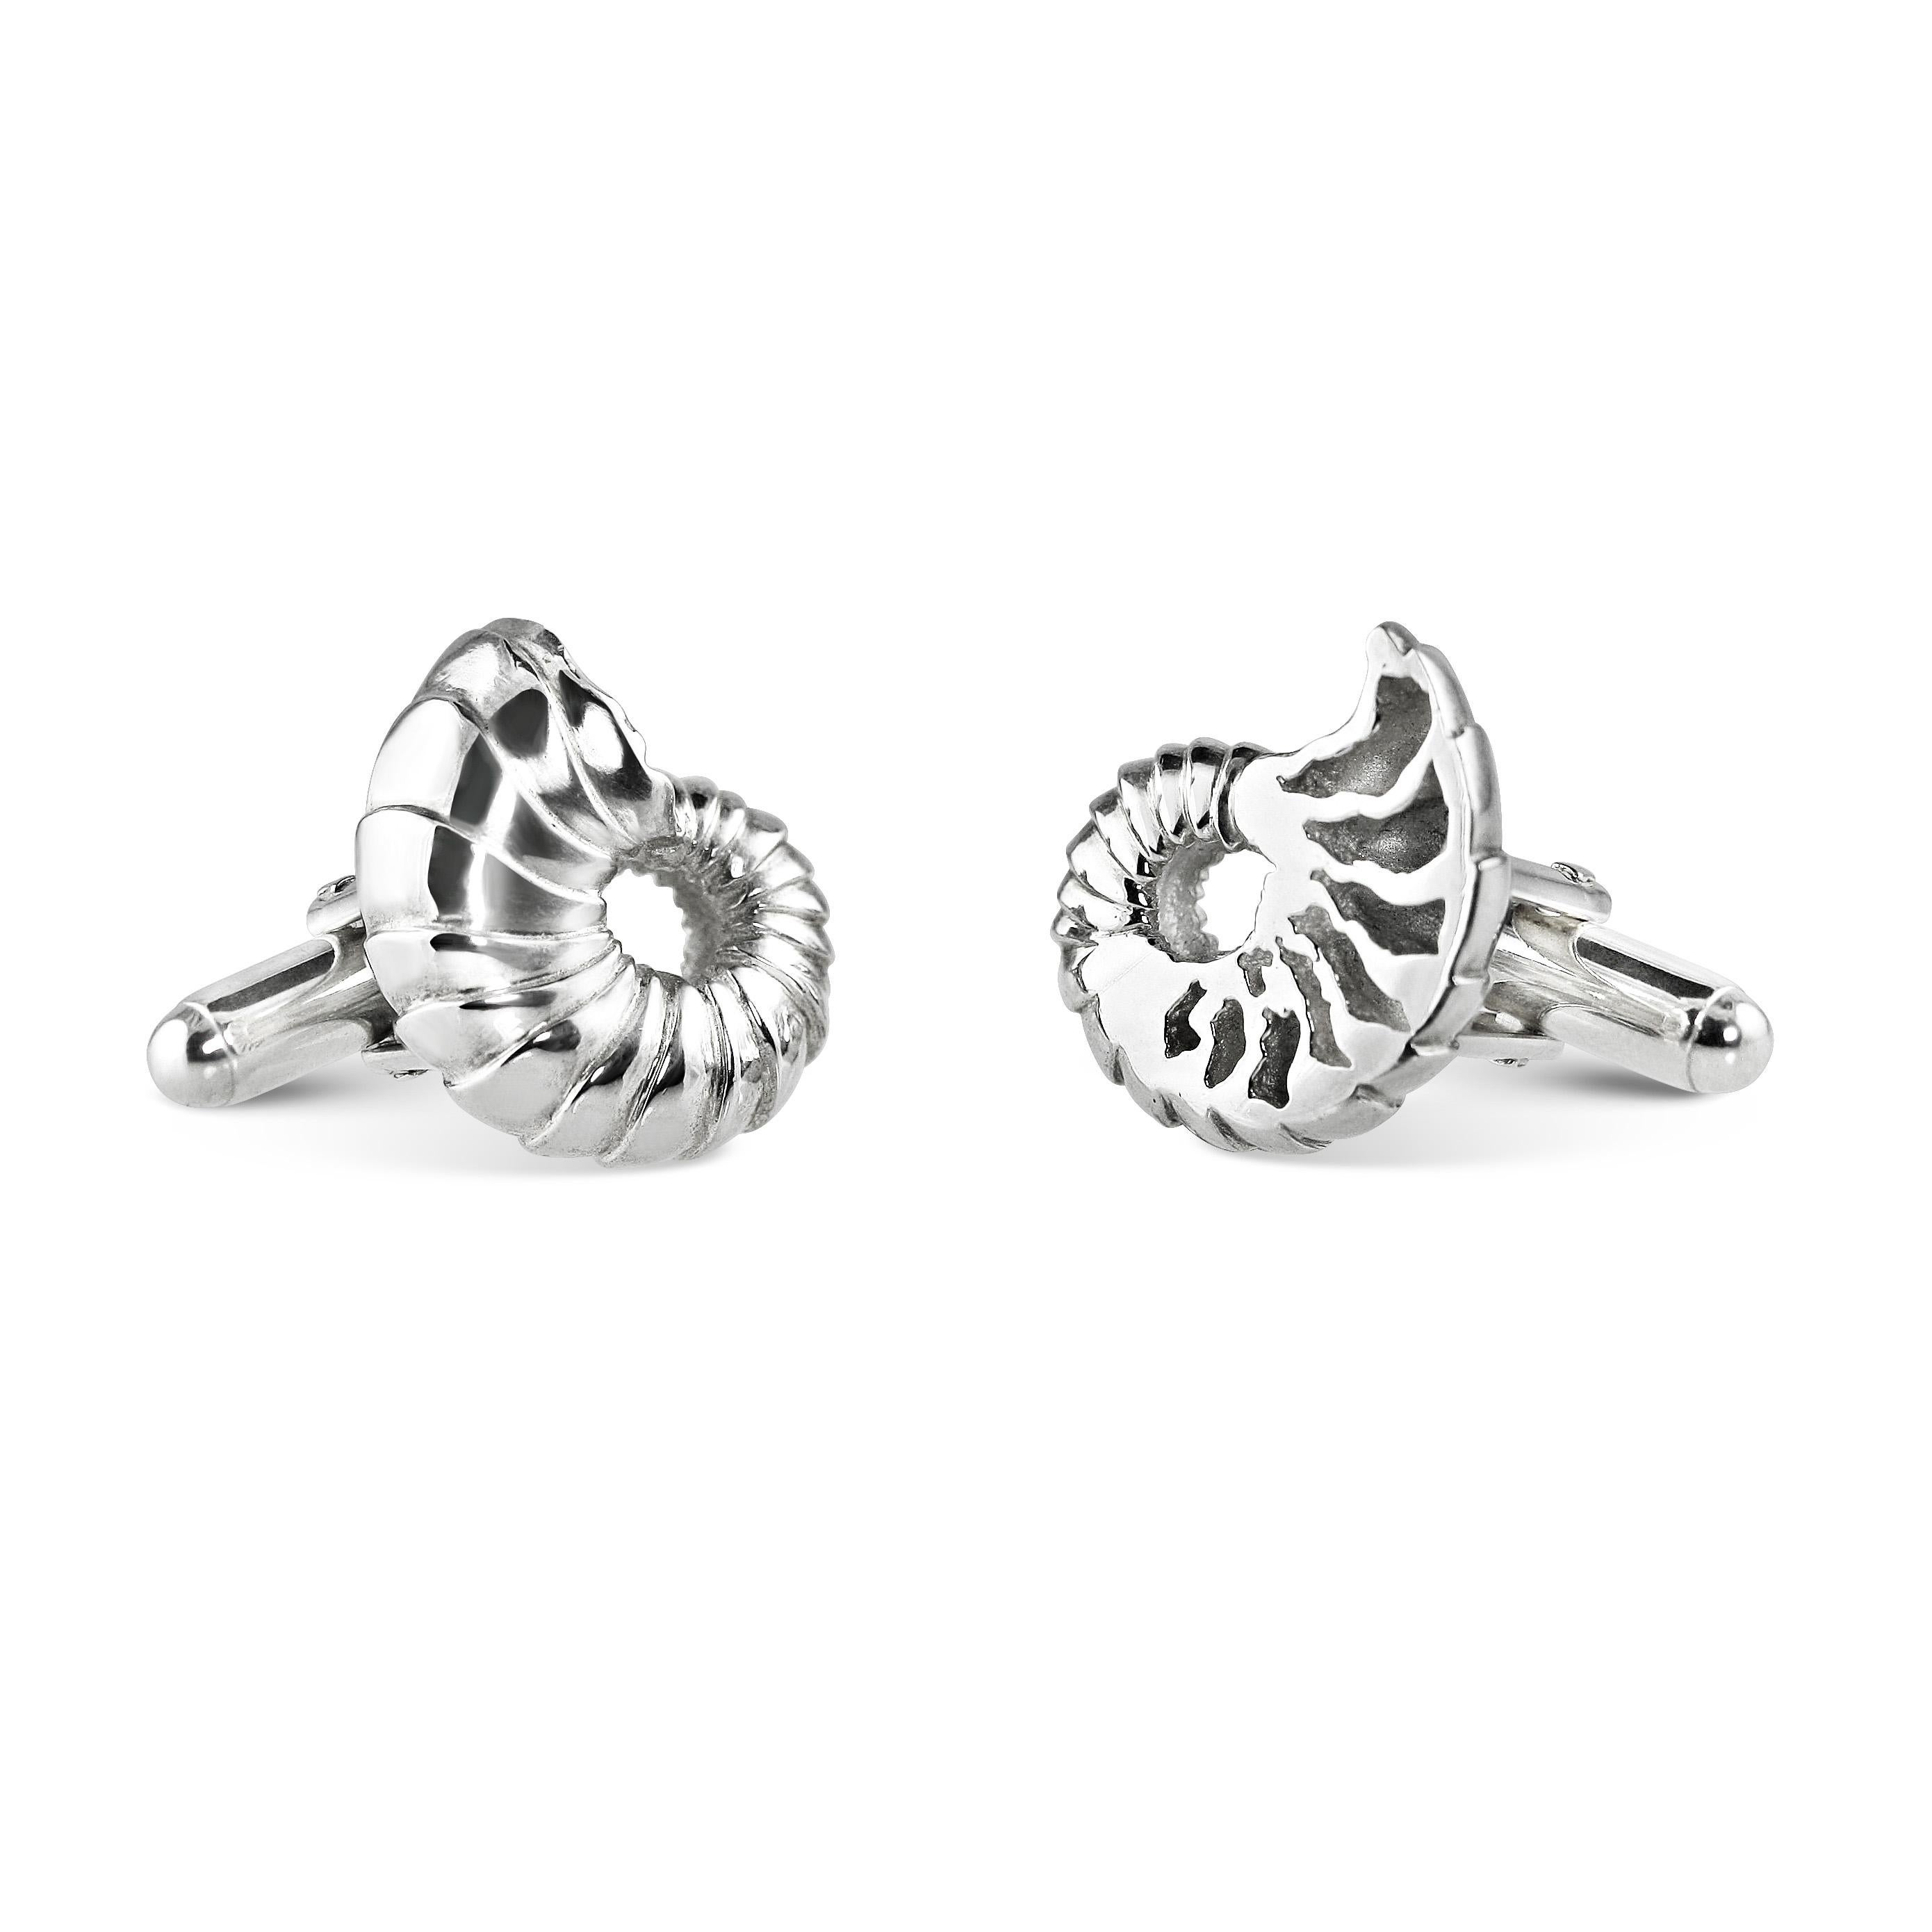 Asymmetrical ammonite shell cufflinks. These cufflinks exude natural elegance & intrigue.

The Ammonite Cufflinks are moulded directly from a real fossilised Ammonite shell. This gives the cufflinks real depth and detail. 

These cufflinks are made